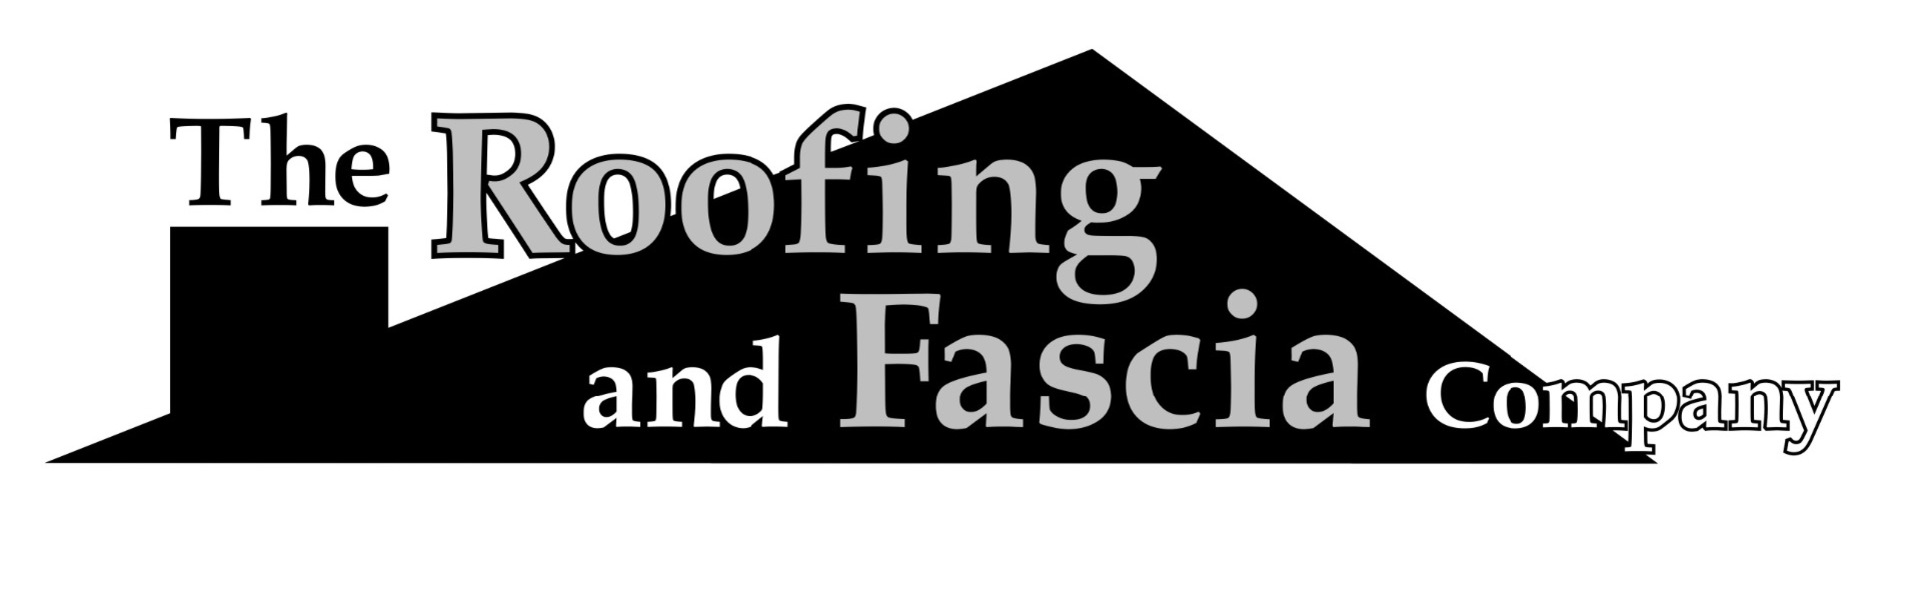 The Roofing and Fascia Company- Flat Roof in Sandhurst, Fleet, Camberley, Yateley, Aldershot, Farnborough, Frimley, Roofing, Fascias and Soffits, Crowthorne, Bracknell